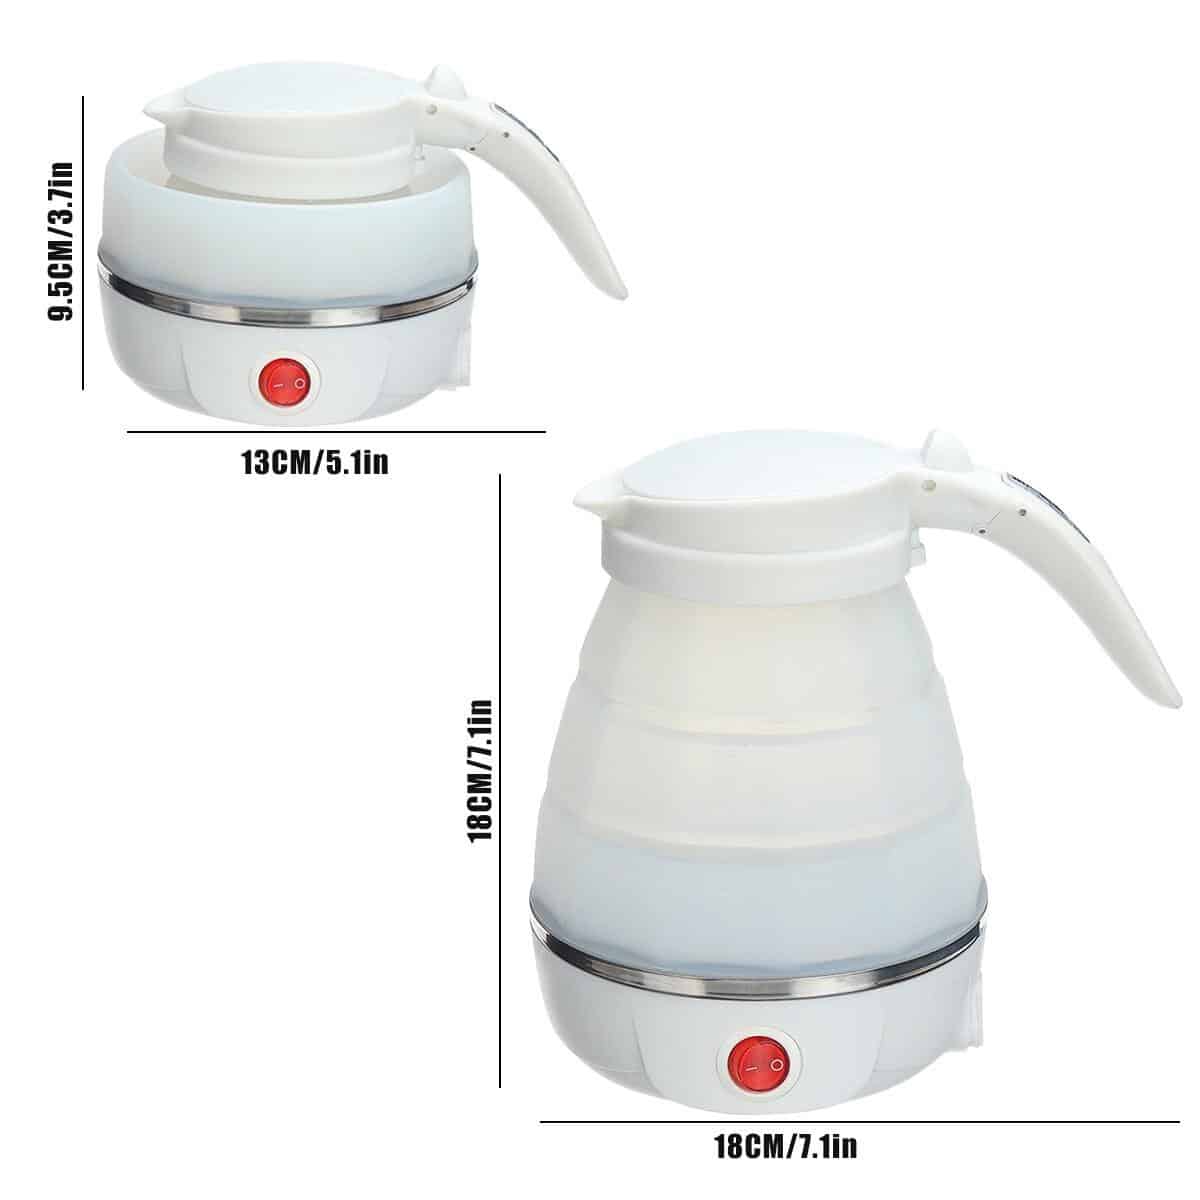 0.6L Electric Kettle Safety Silicone Foldable Portable Travel Camping Water Boiler Heater 220V 700W Mini Home Electric Appliance